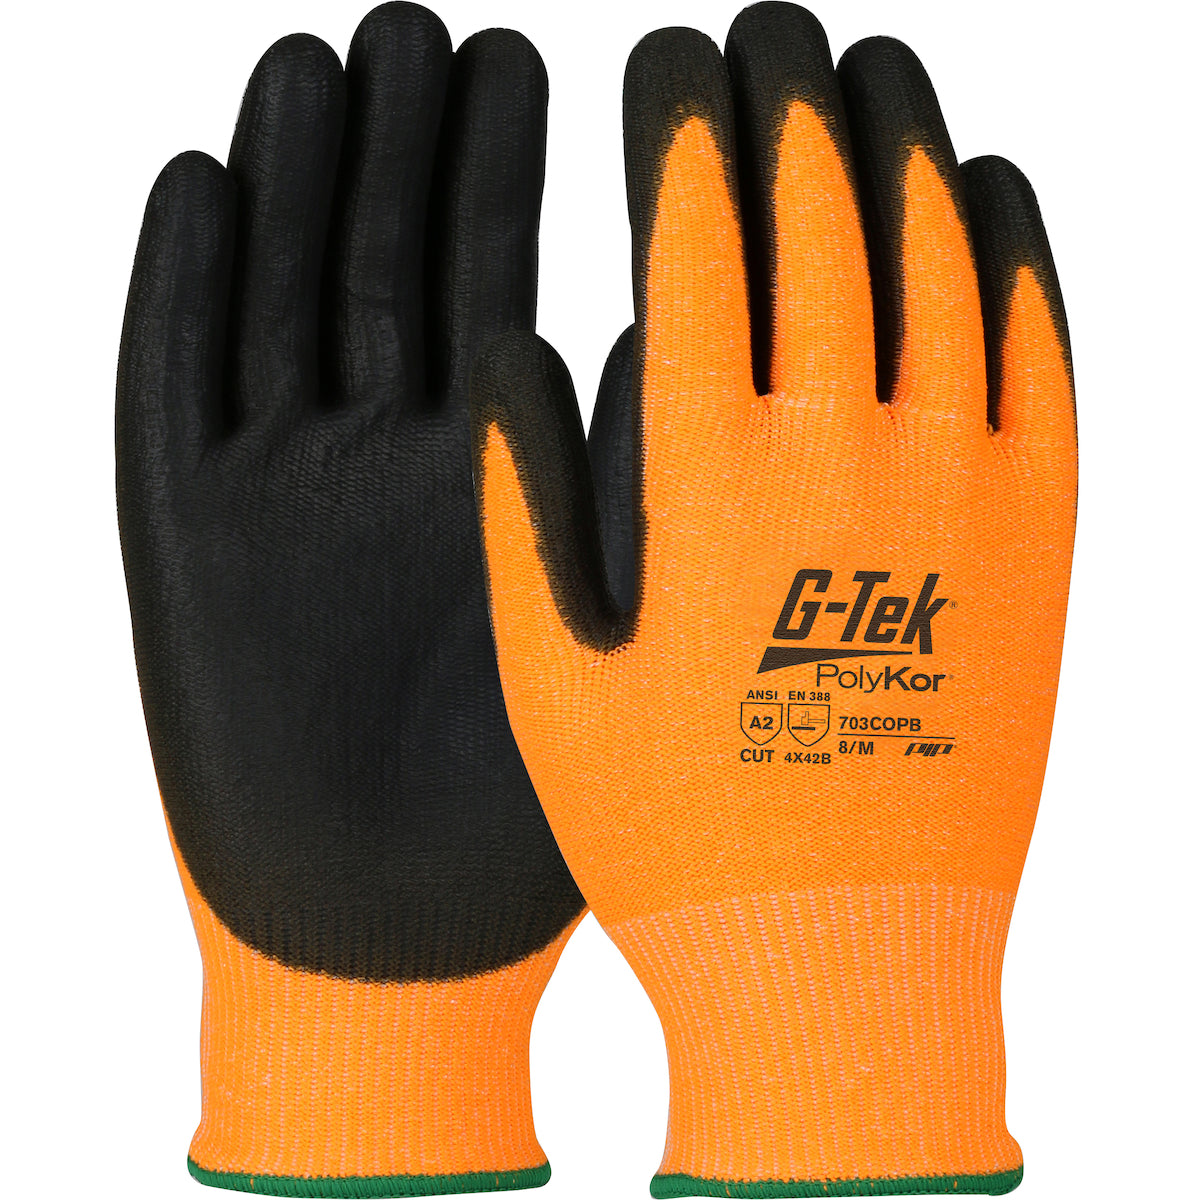 Hi-Vis Seamless Knit HPPE Blended Glove with Polyurethane Coated Palm & Fingers-eSafety Supplies, Inc